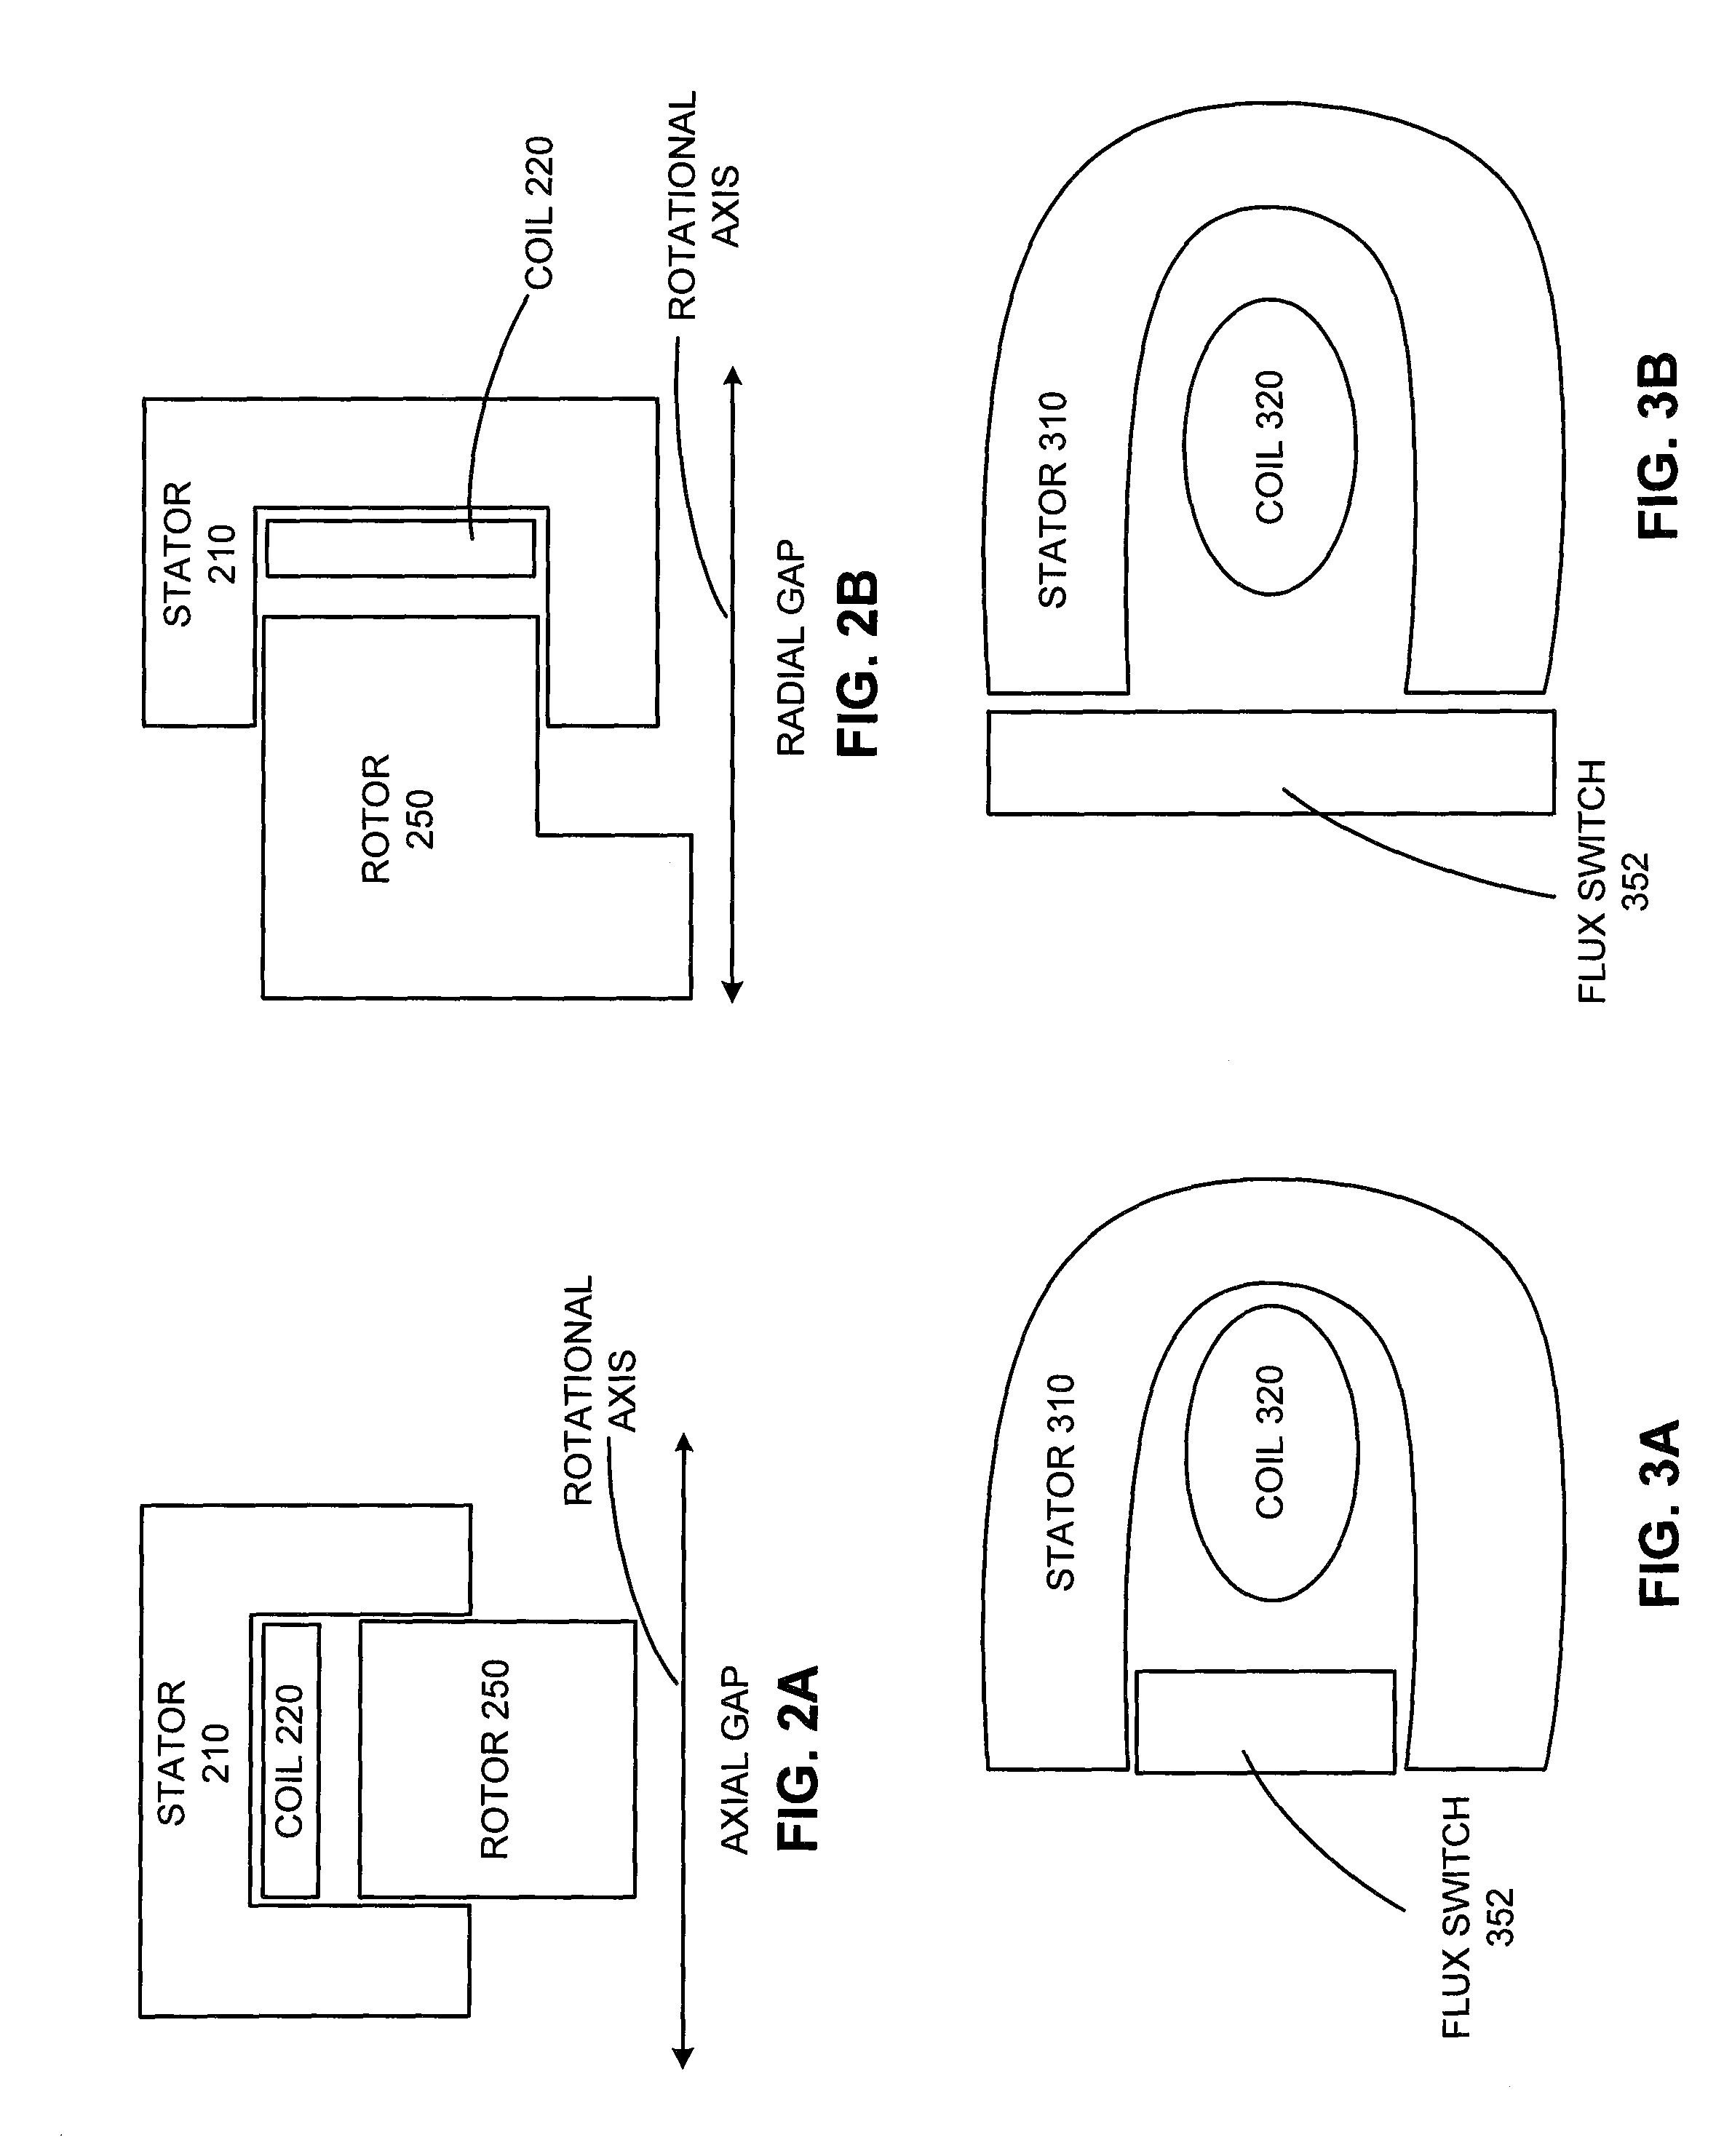 Transverse and/or commutated flux systems having multidirectional laminations